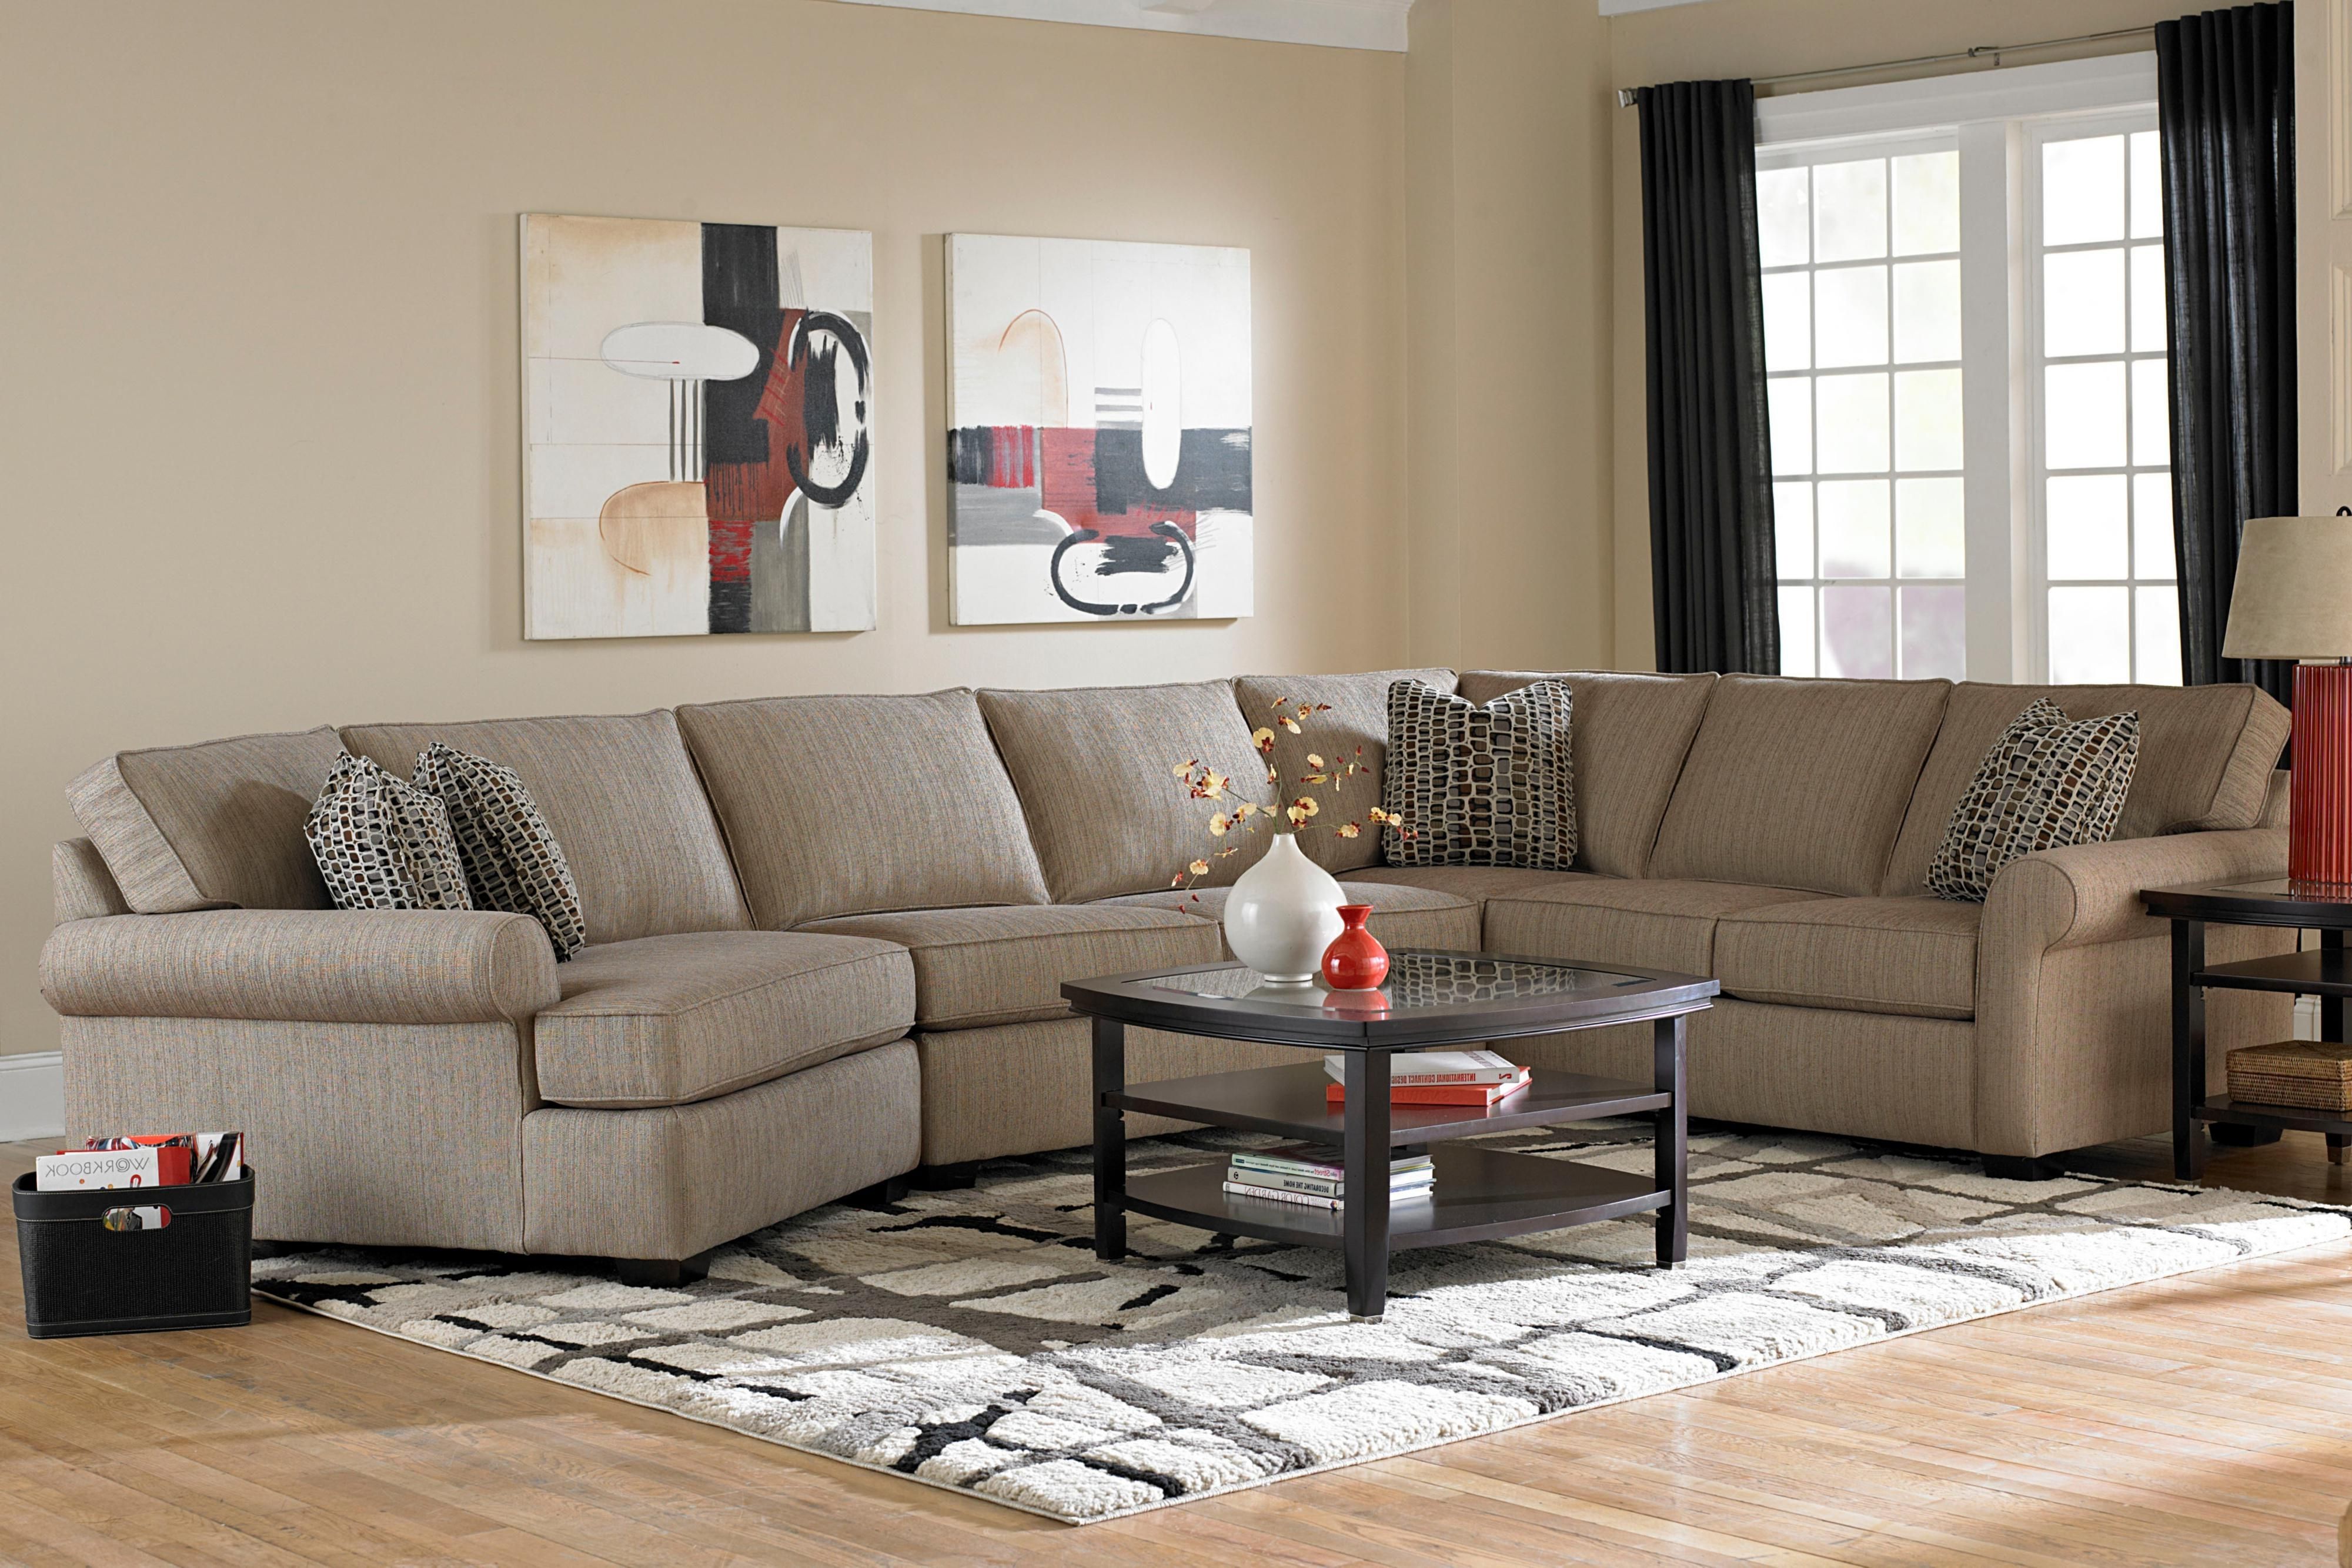 Central Furniture Springfield Mo Big Lots Chevy Springfield Mo Throughout Joplin Mo Sectional Sofas (Photo 1 of 10)